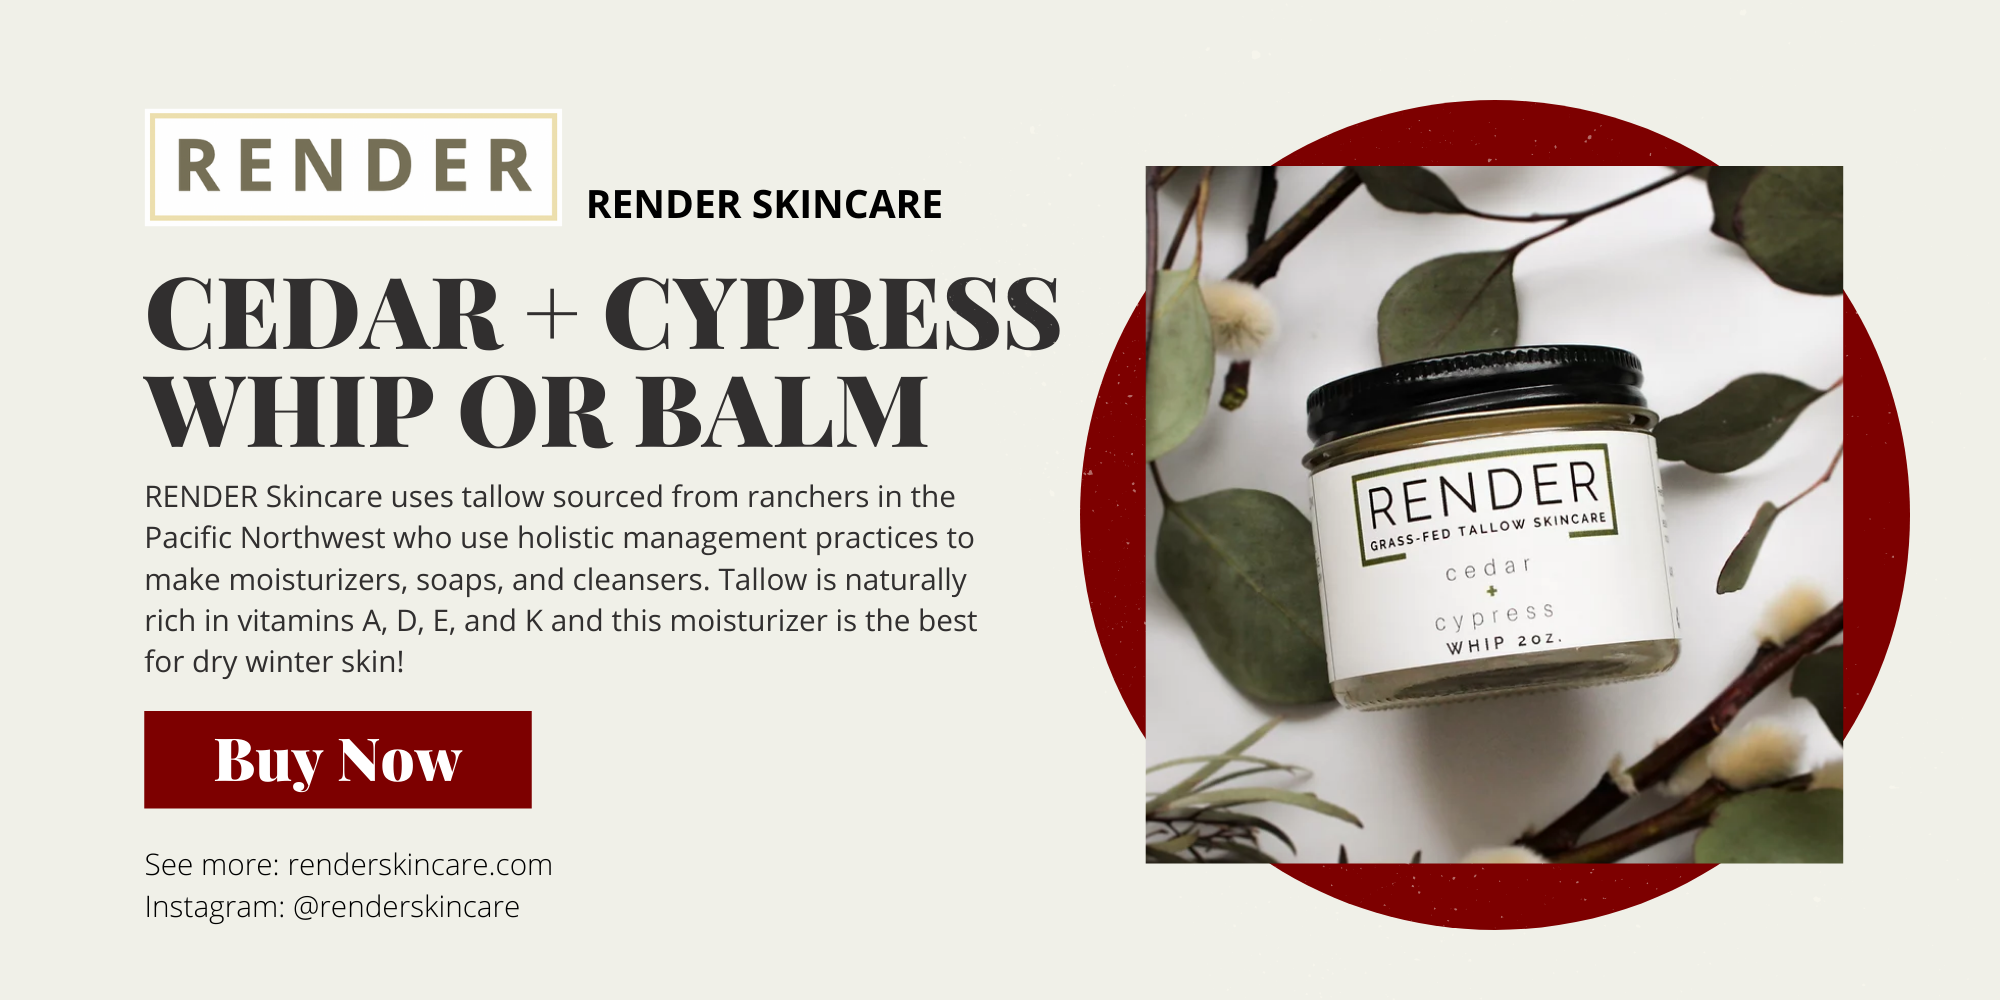 Render Skincare Cedar and Cypress Whip or Balm